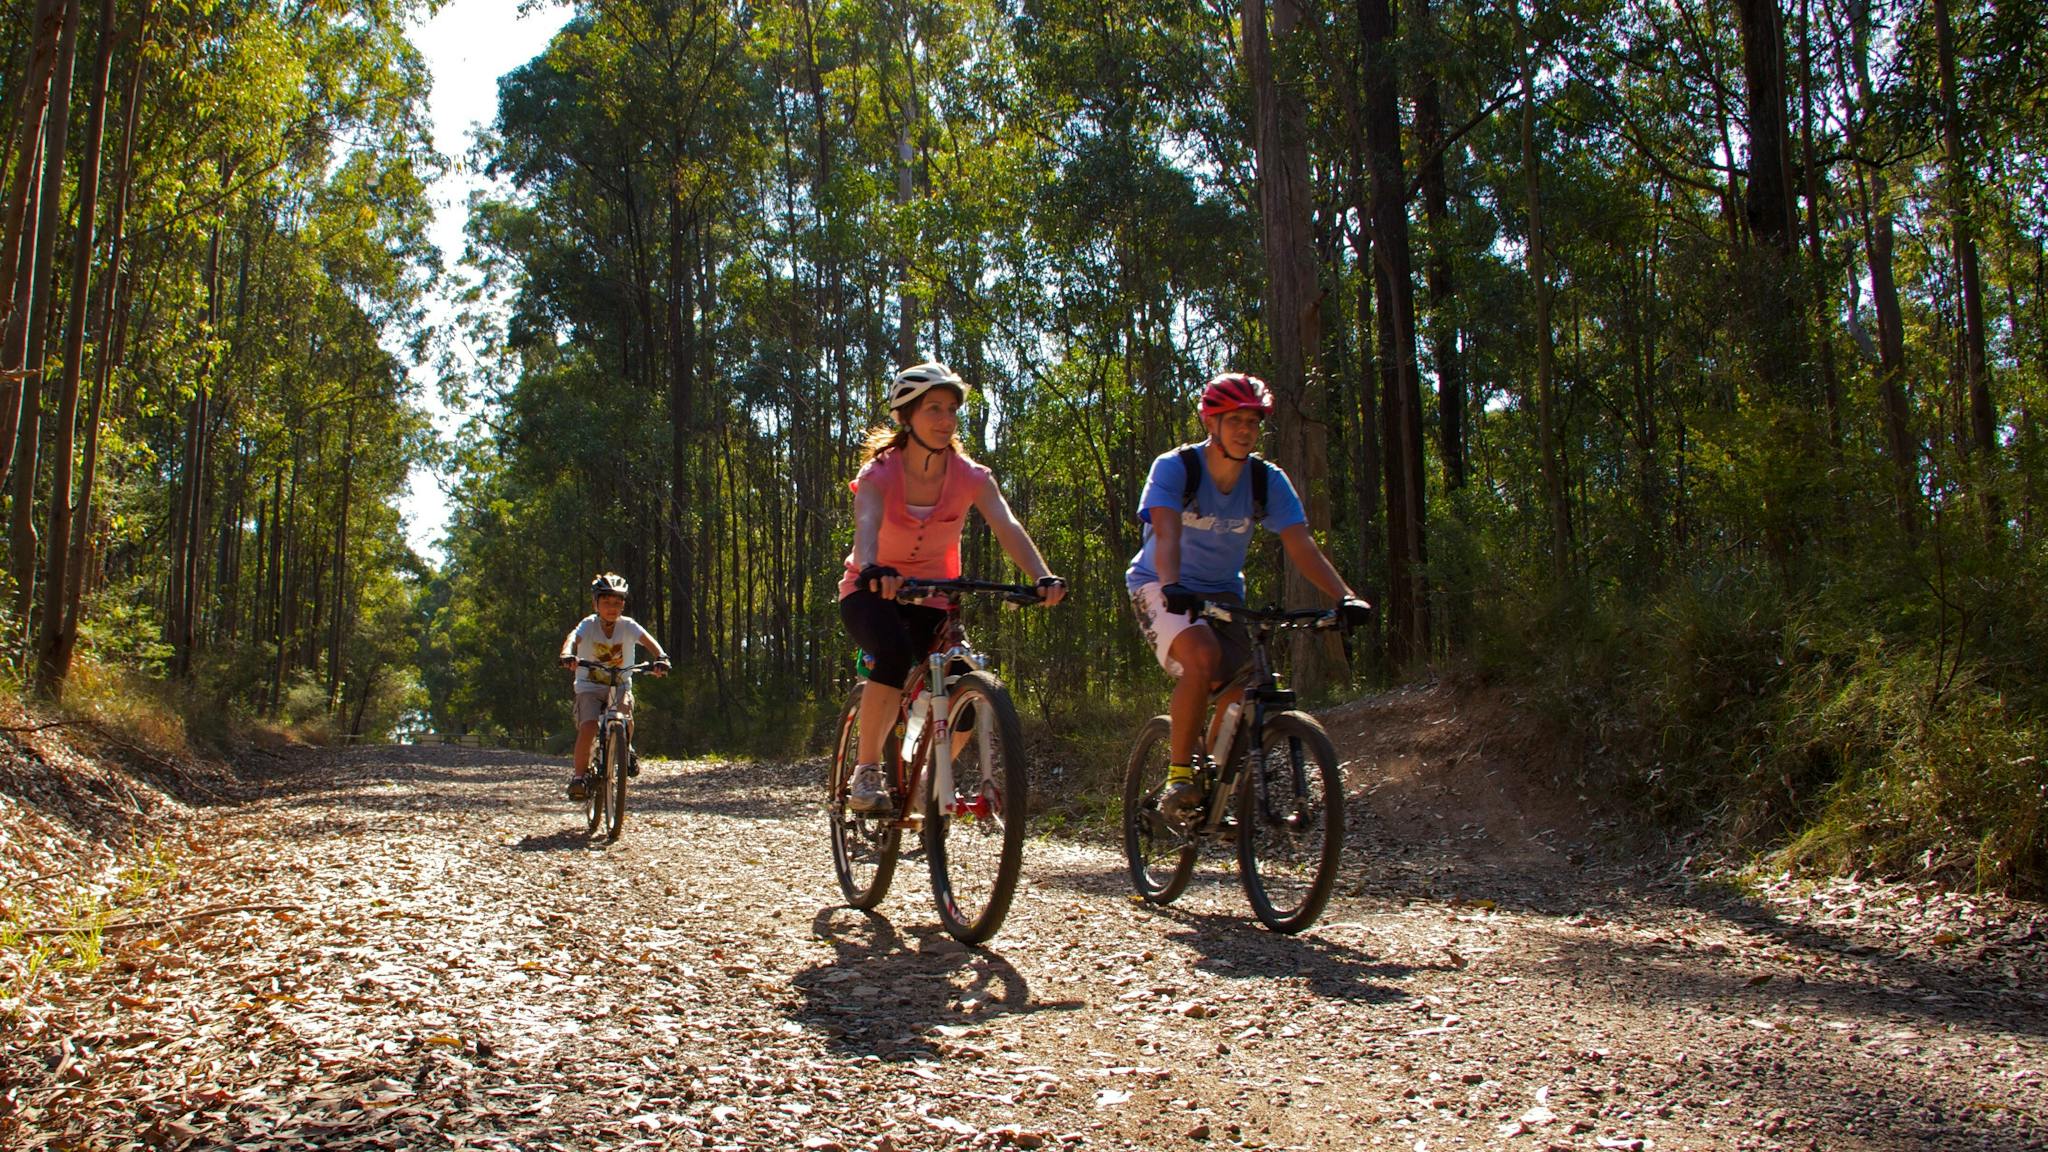 Family rides bicycles along dirt track fringed by forest.